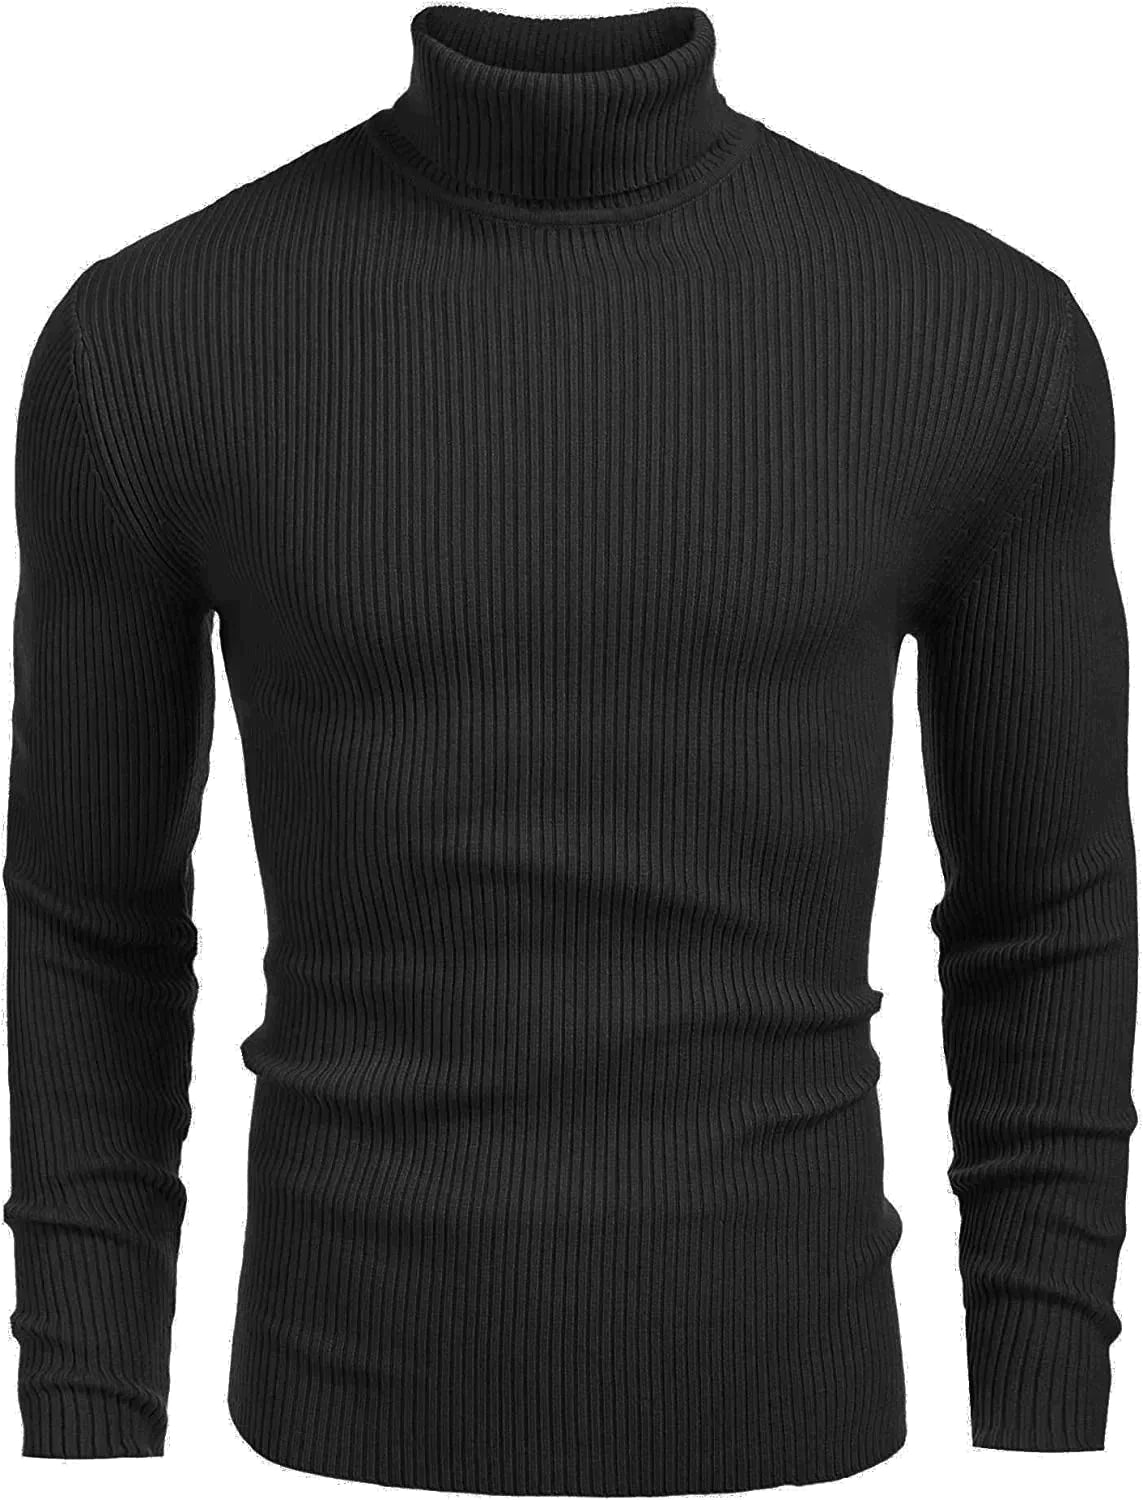 Ribbed Slim Fit Knitted Pullover Turtleneck Sweater (US Only) Sweaters COOFANDY Store Black S 